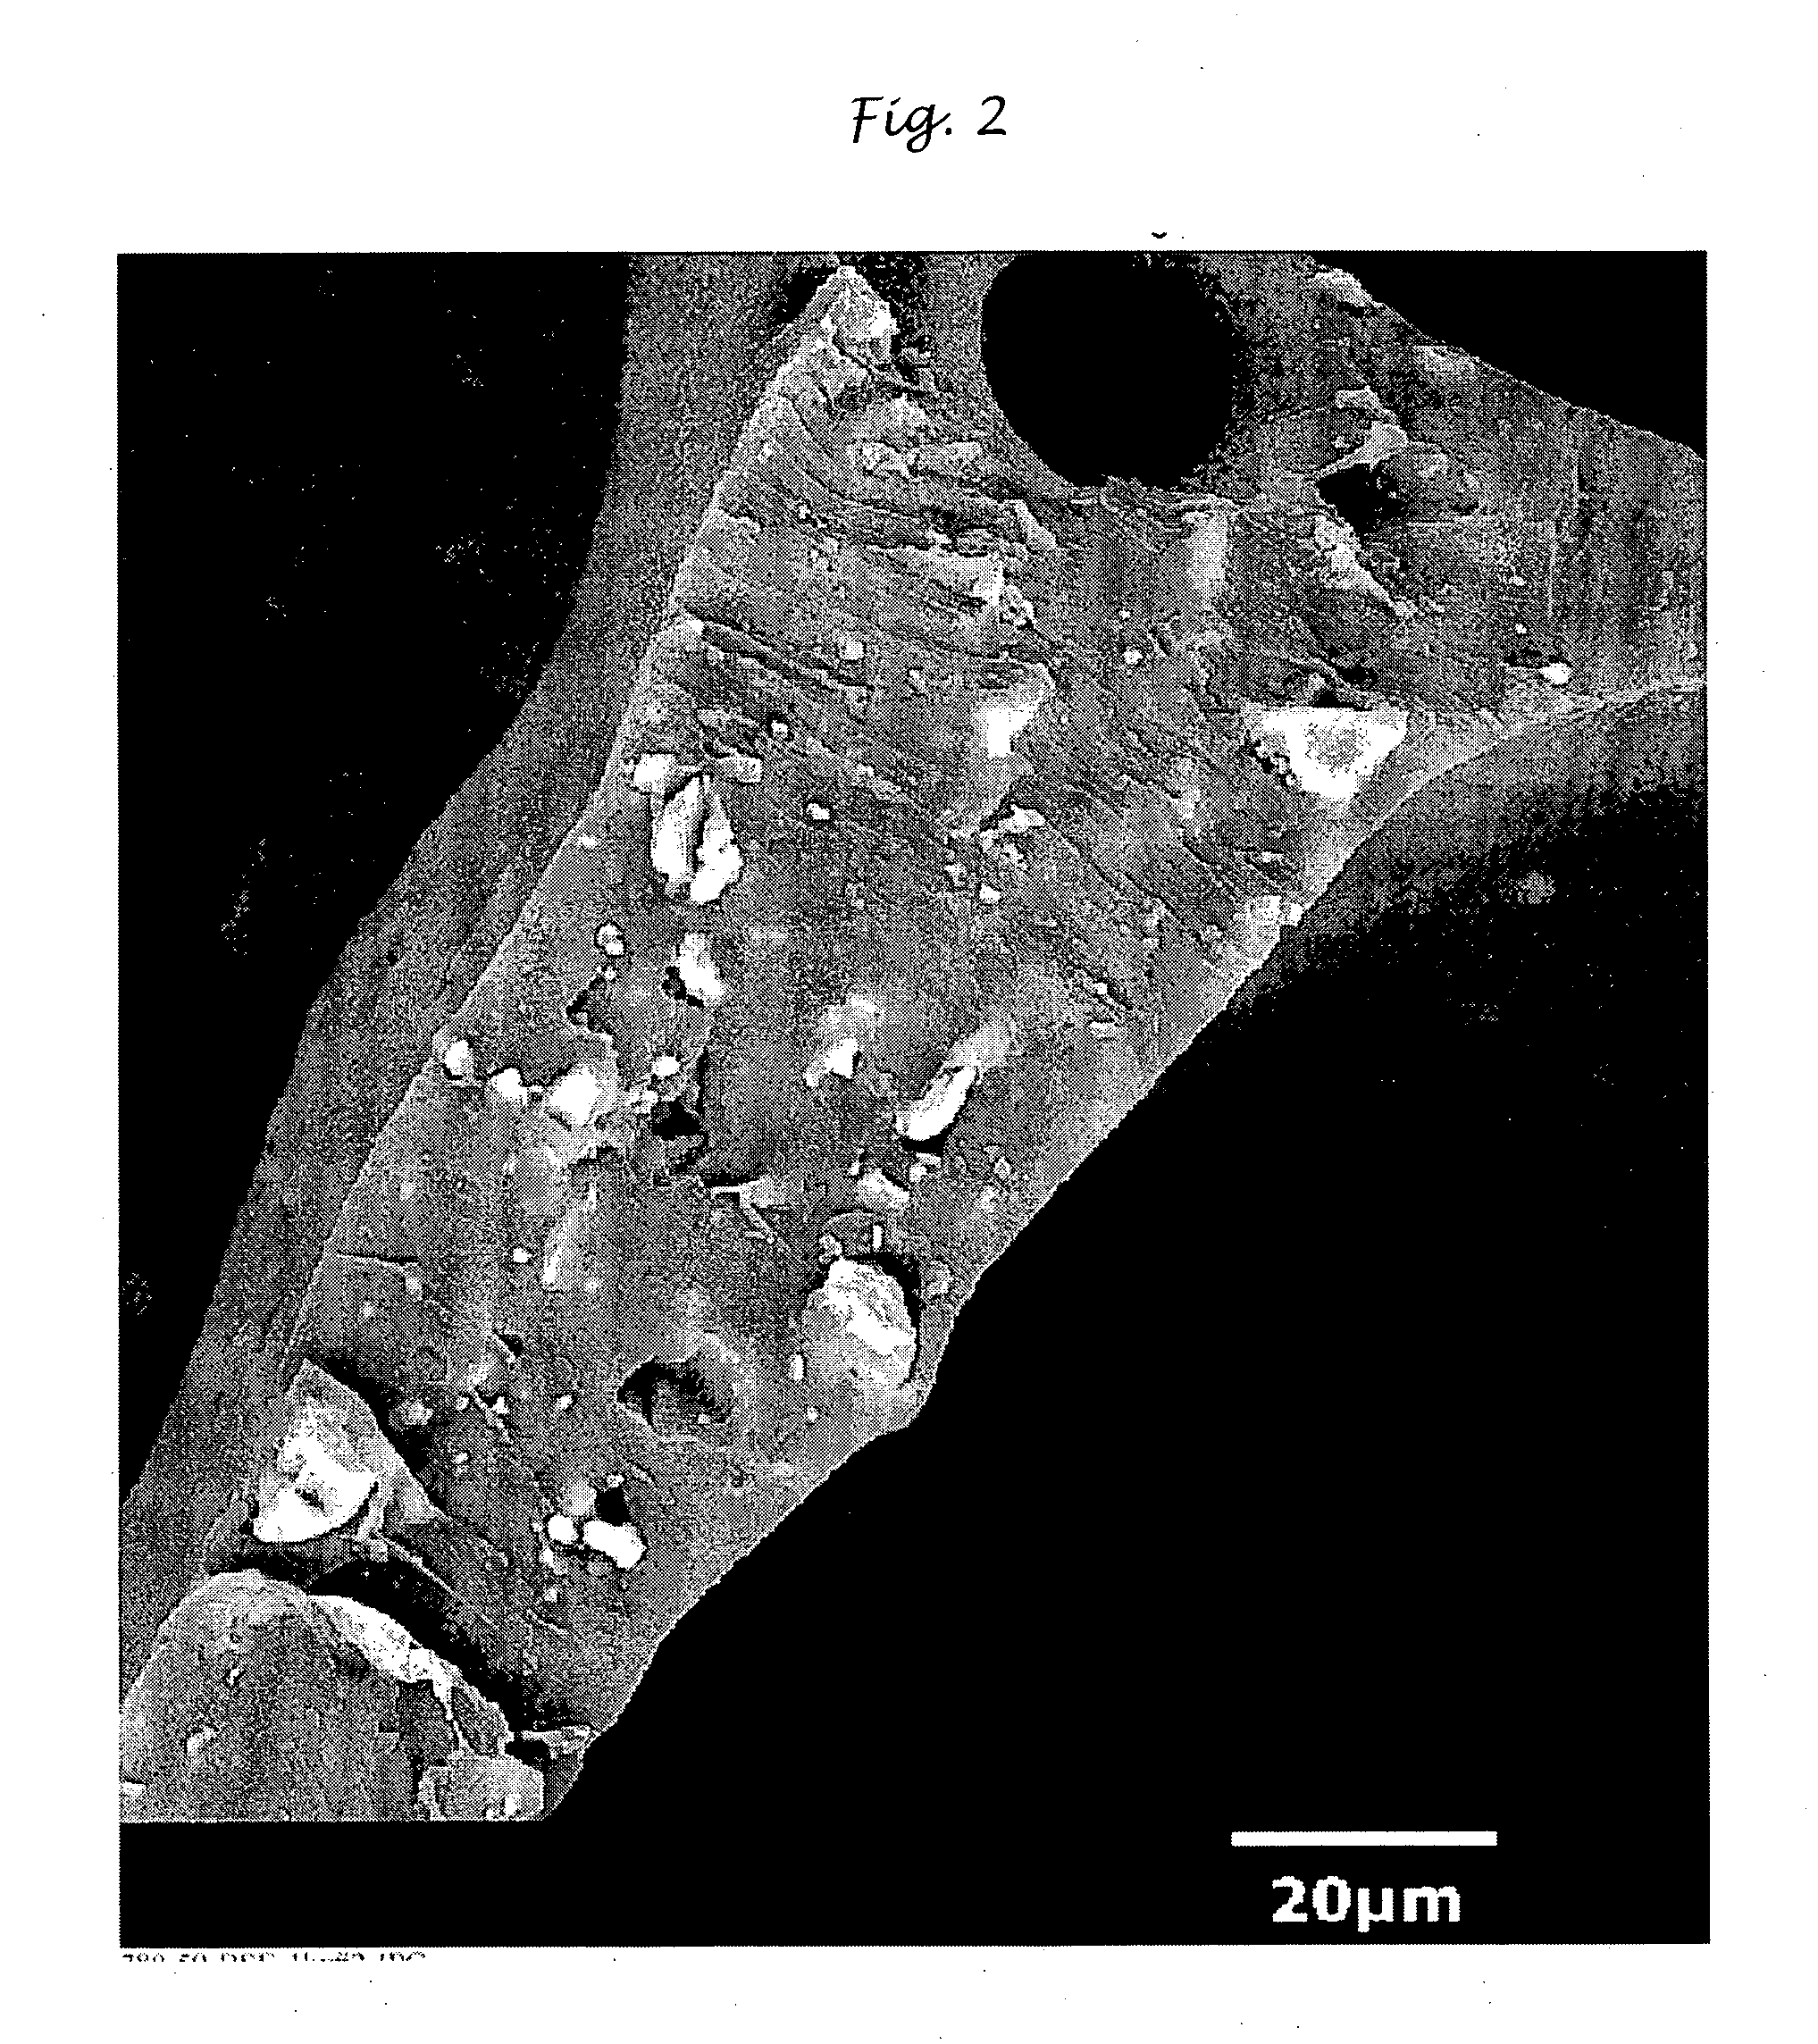 Polyurethane compositions with glass filler and method of making same